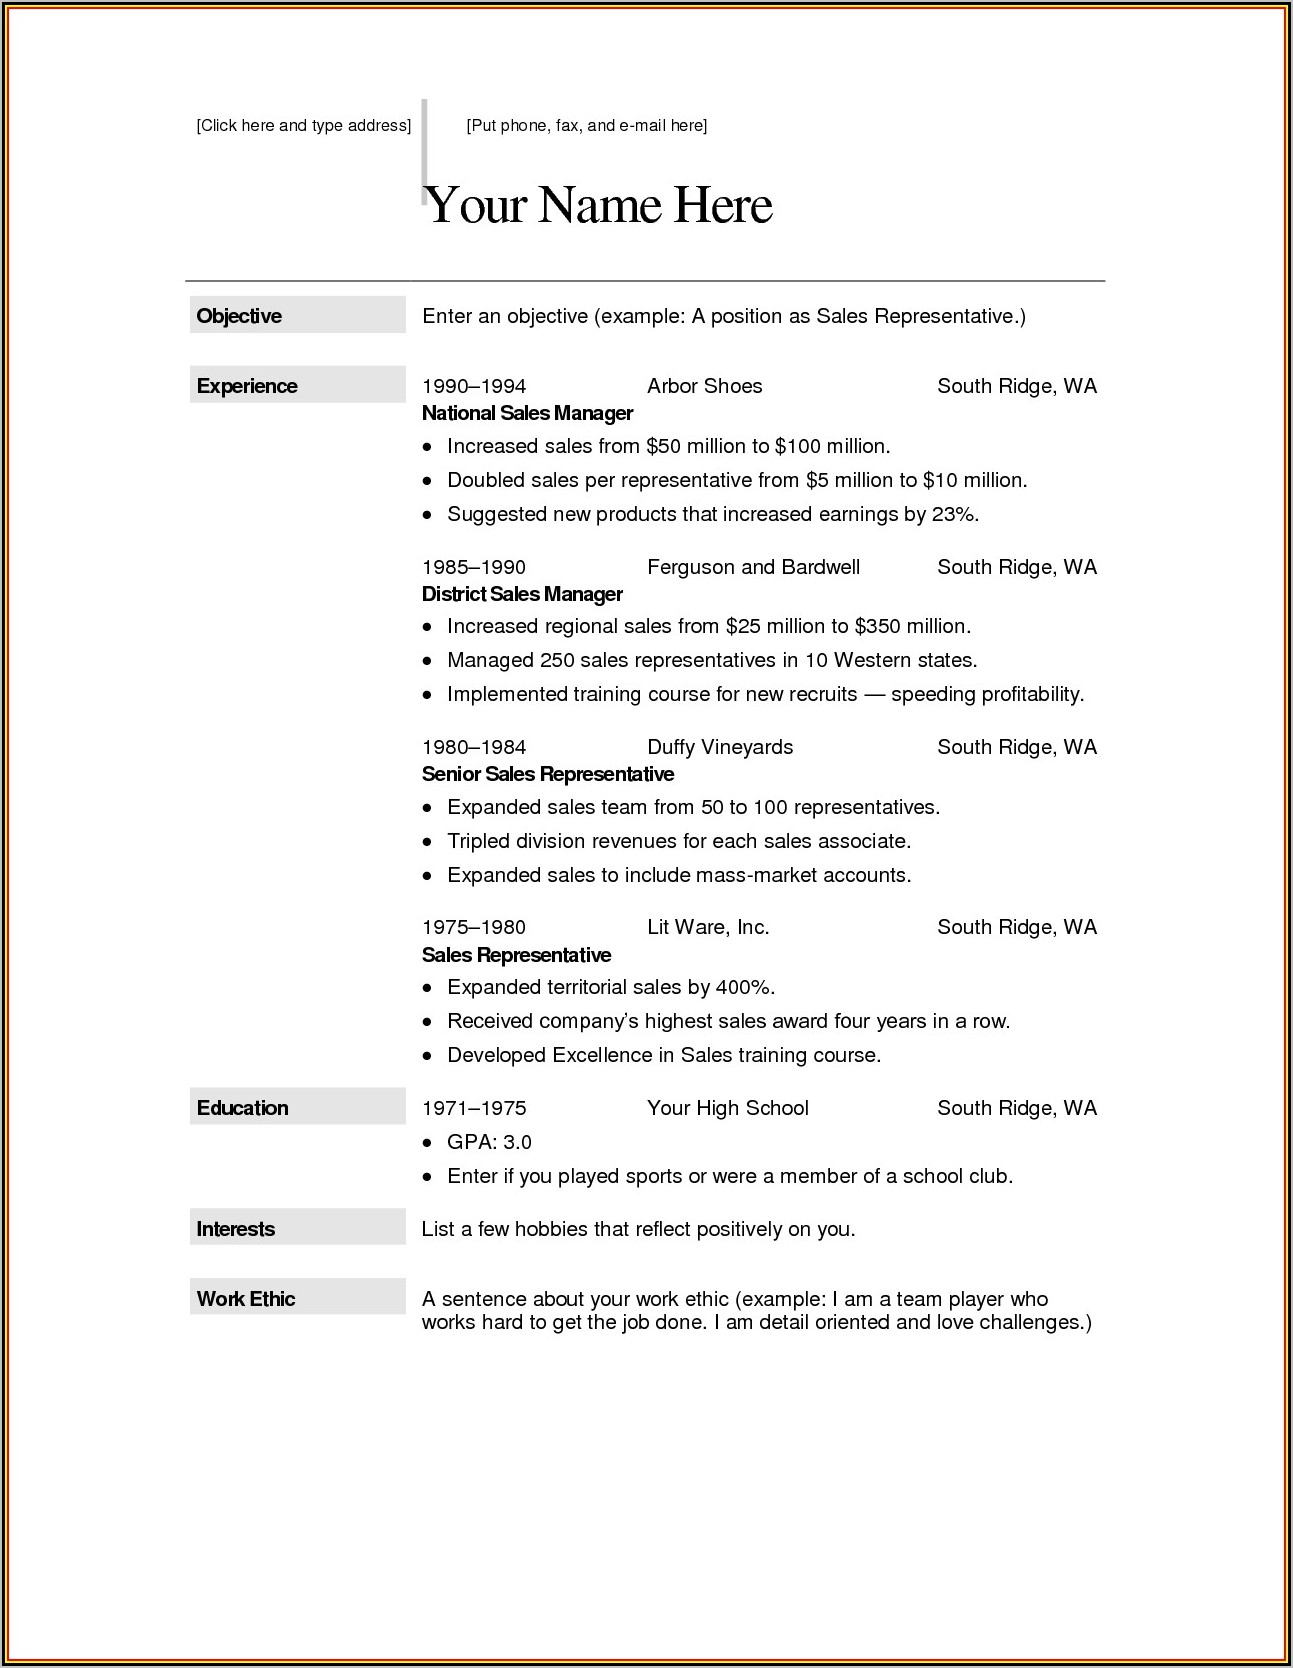 Word Templates For Resumes On Mac